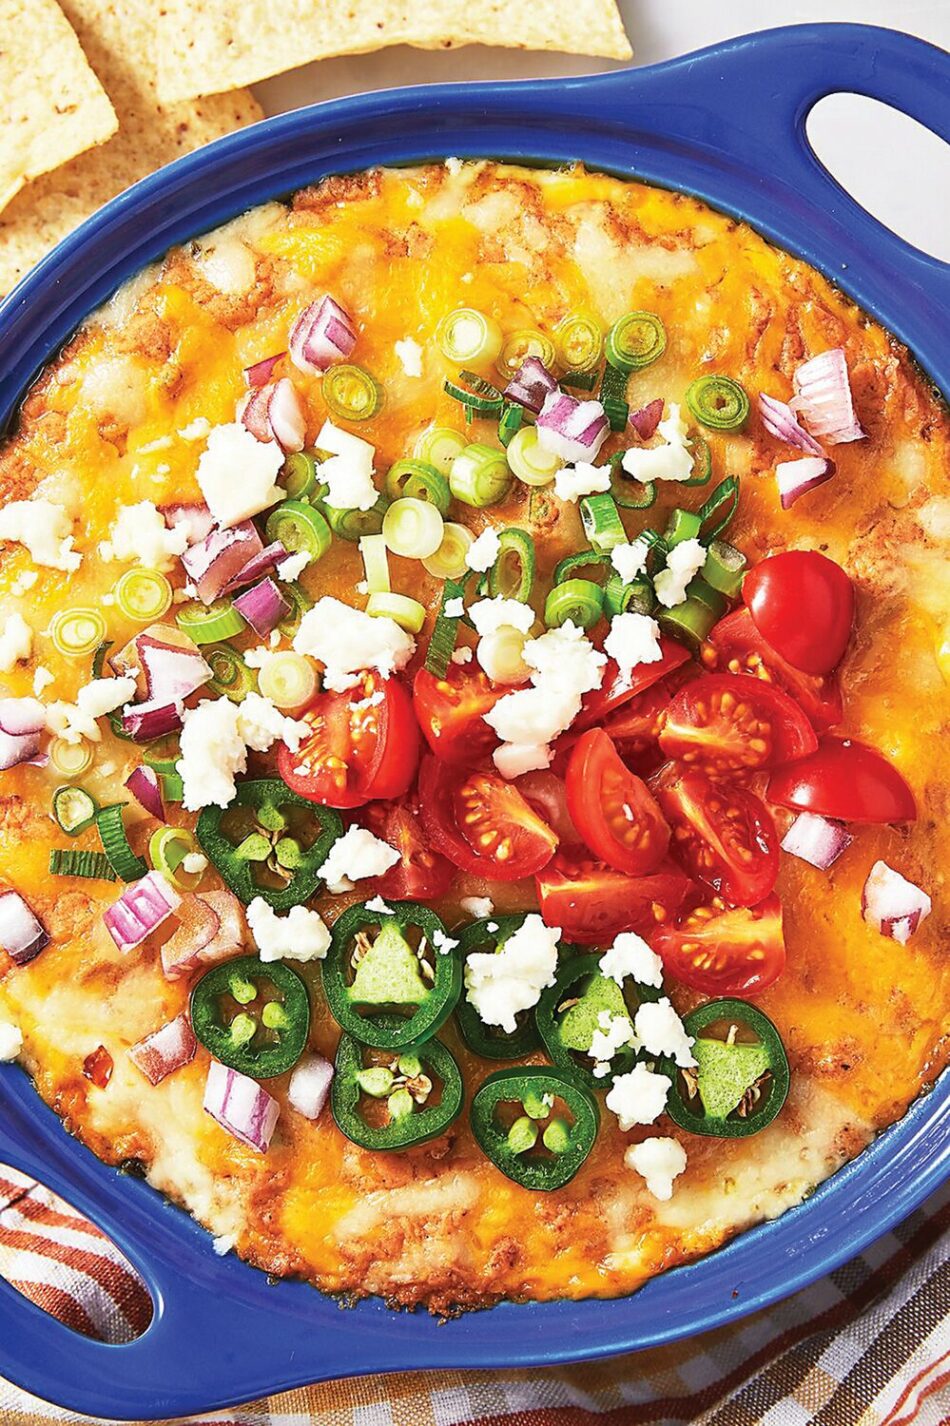 Recipe of the Week: Celebrate Mexican culture on Cinco de Mayo